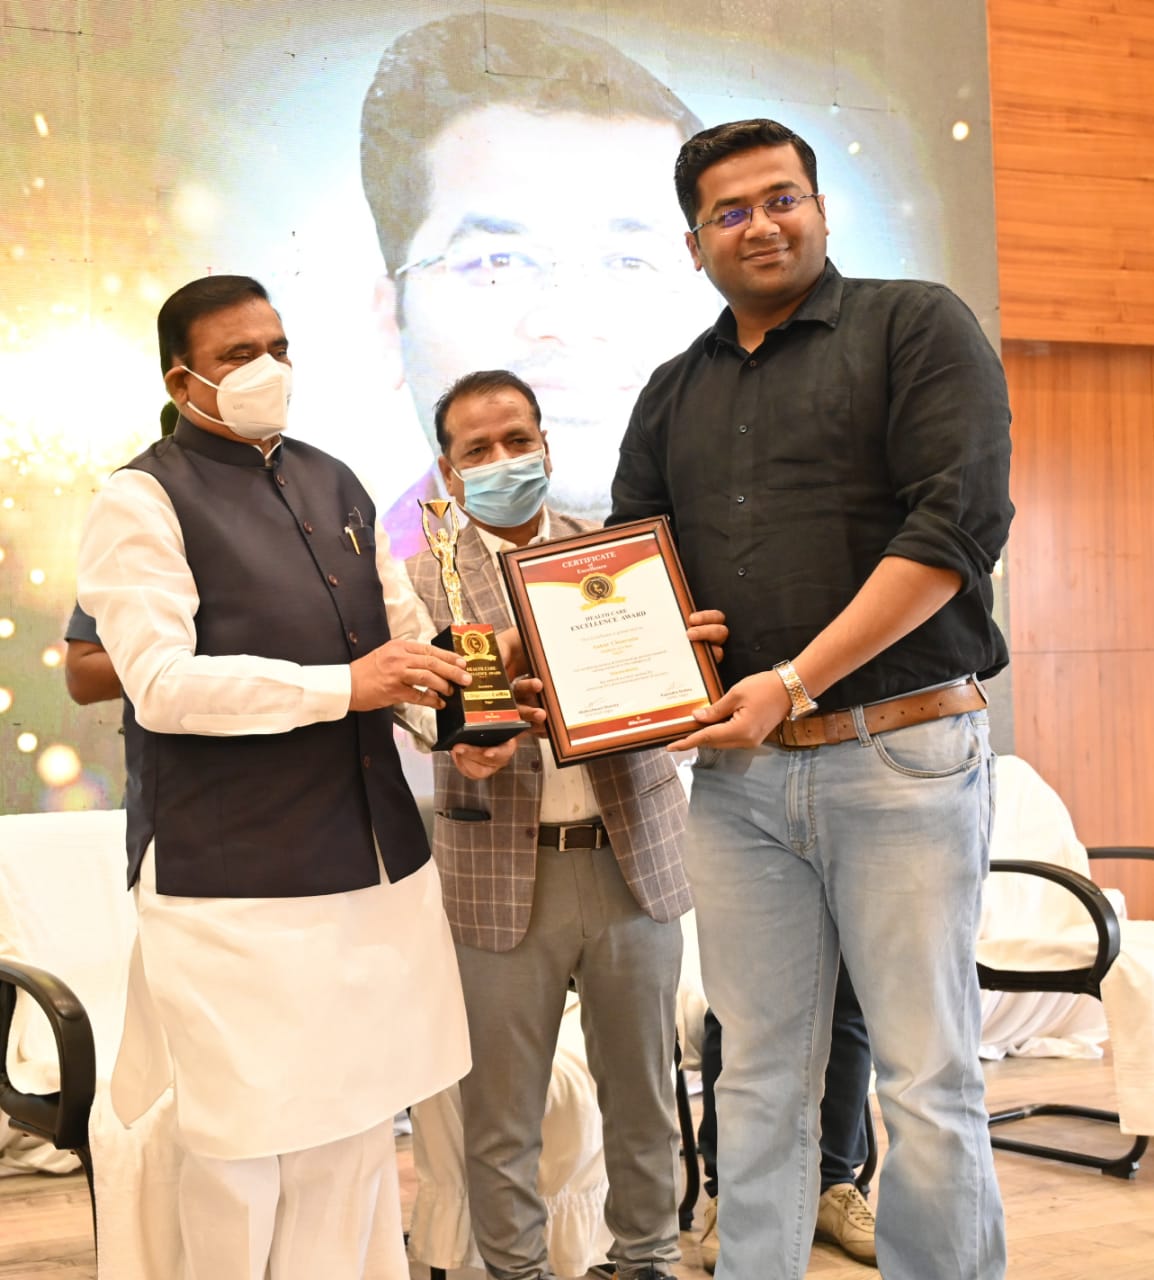 Image of Er. Ankur being awarded for his achievements